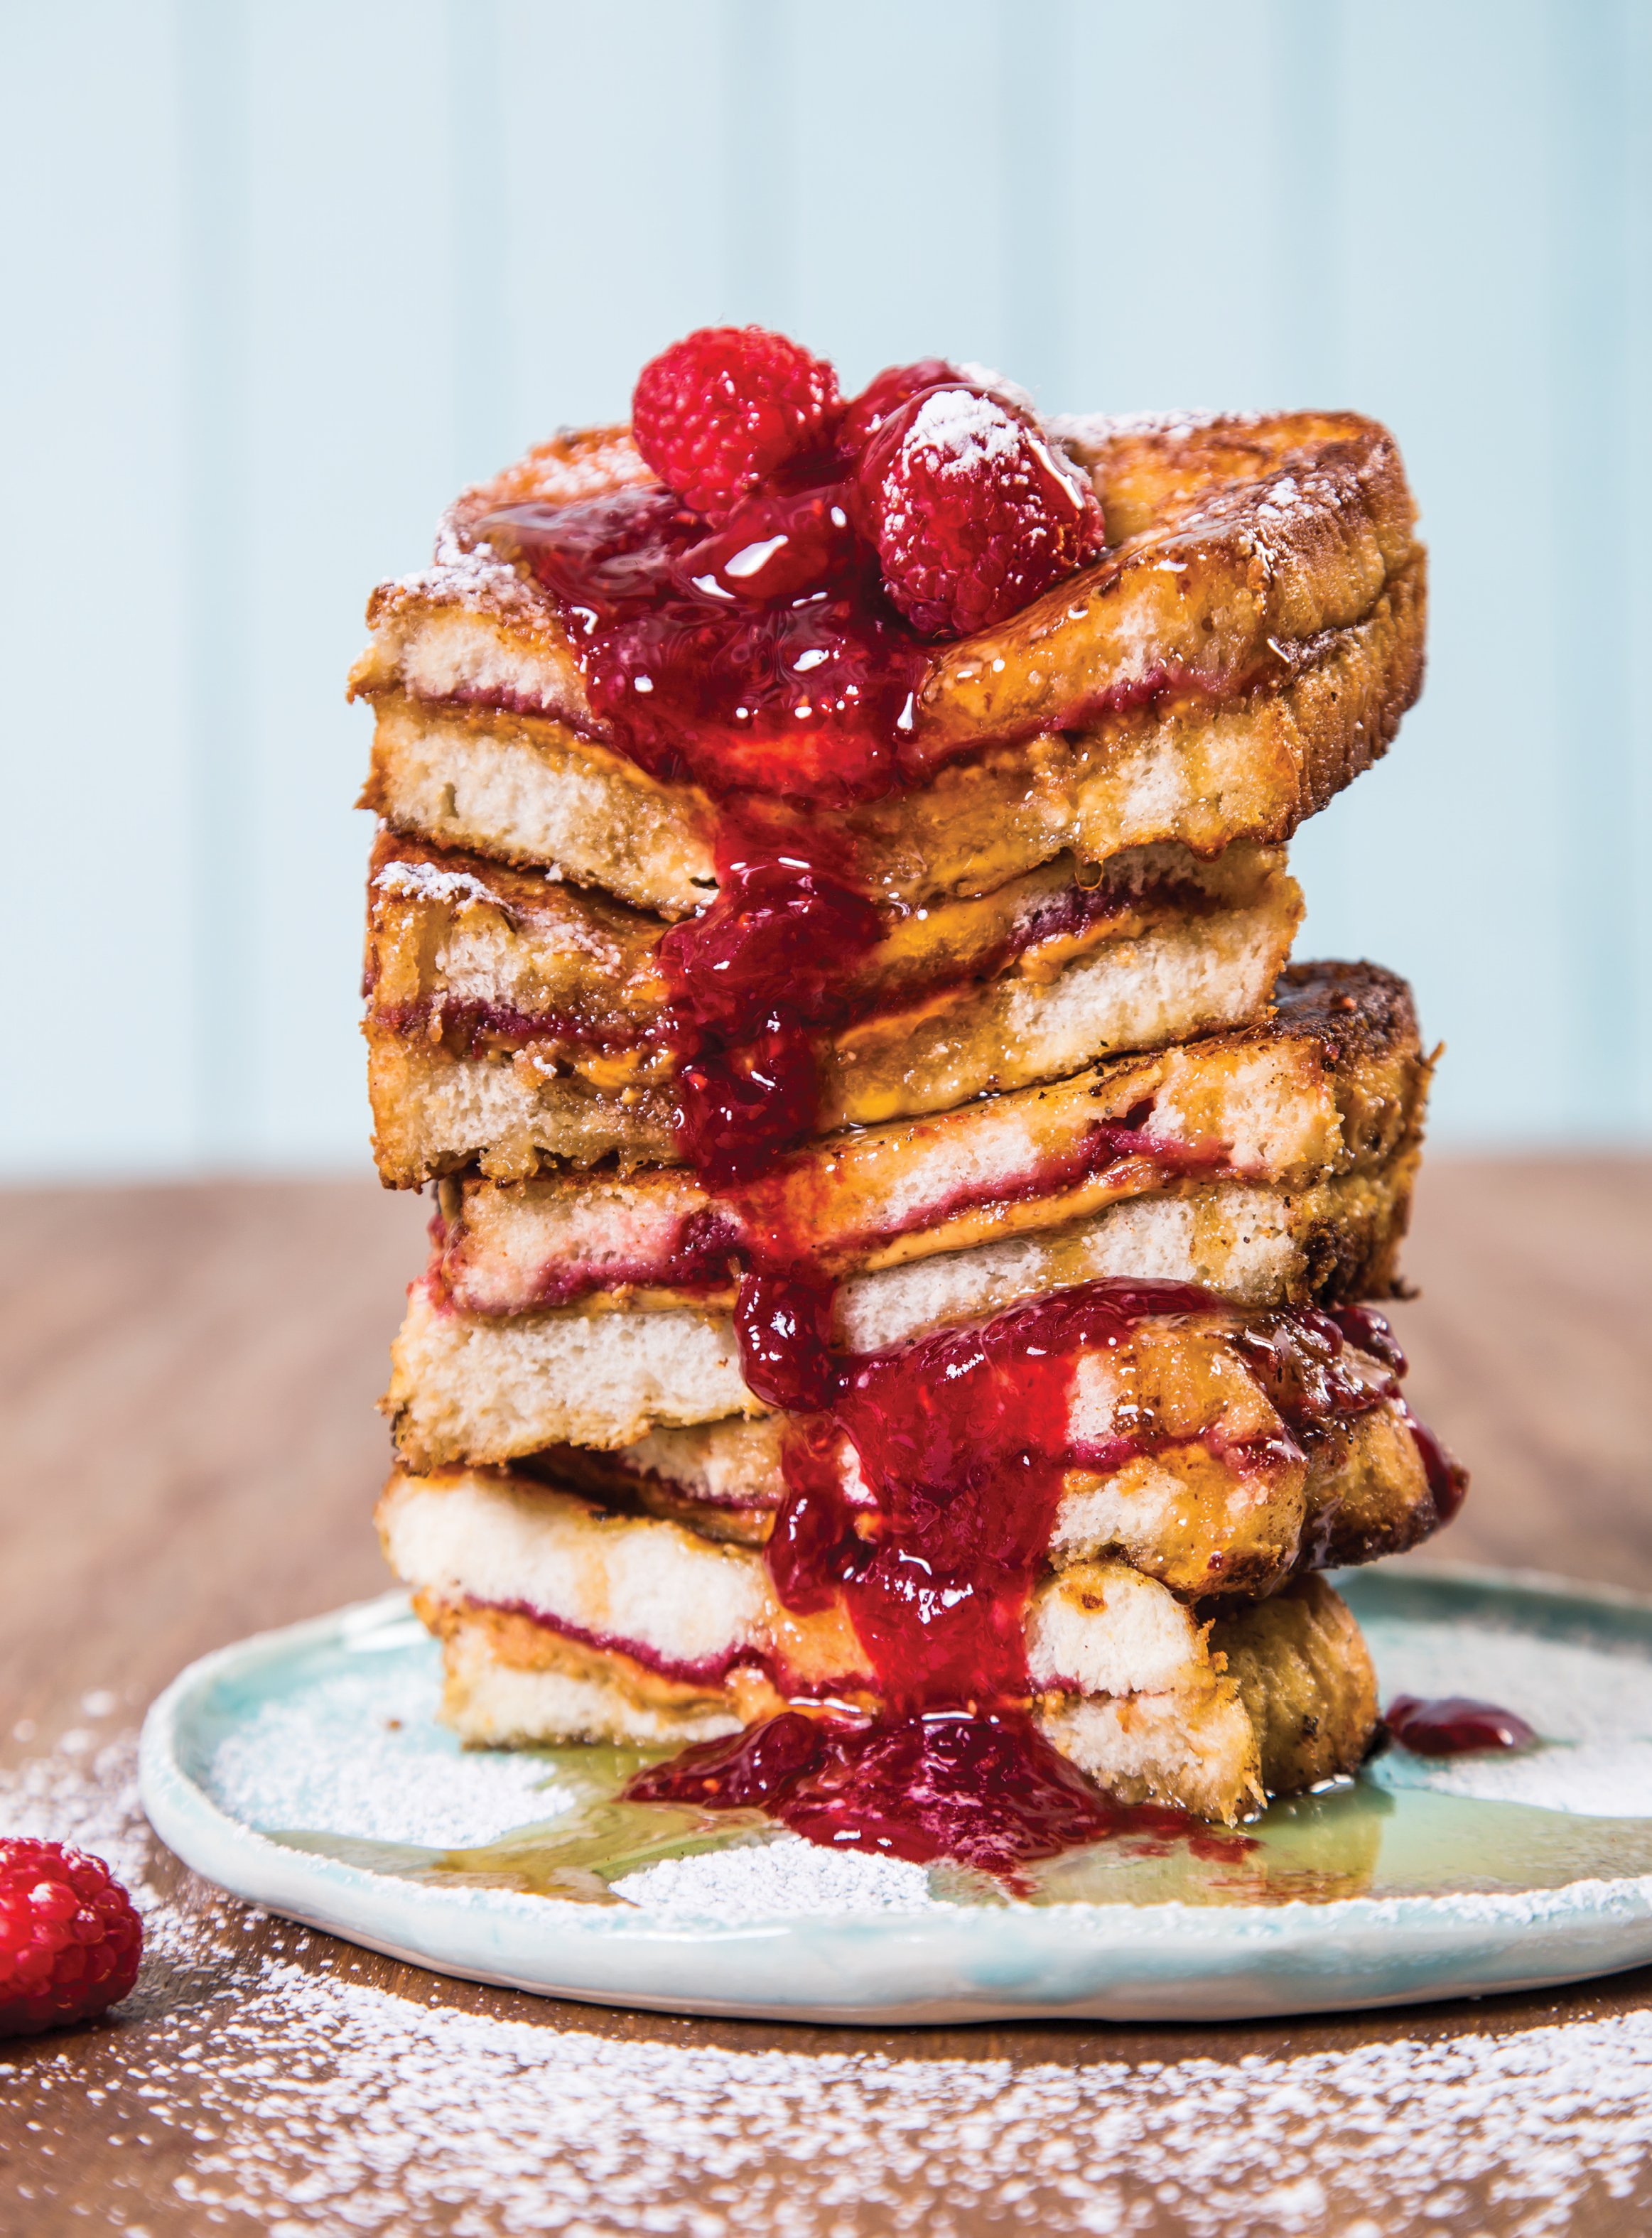 Peanut Butter and Jam French Toast